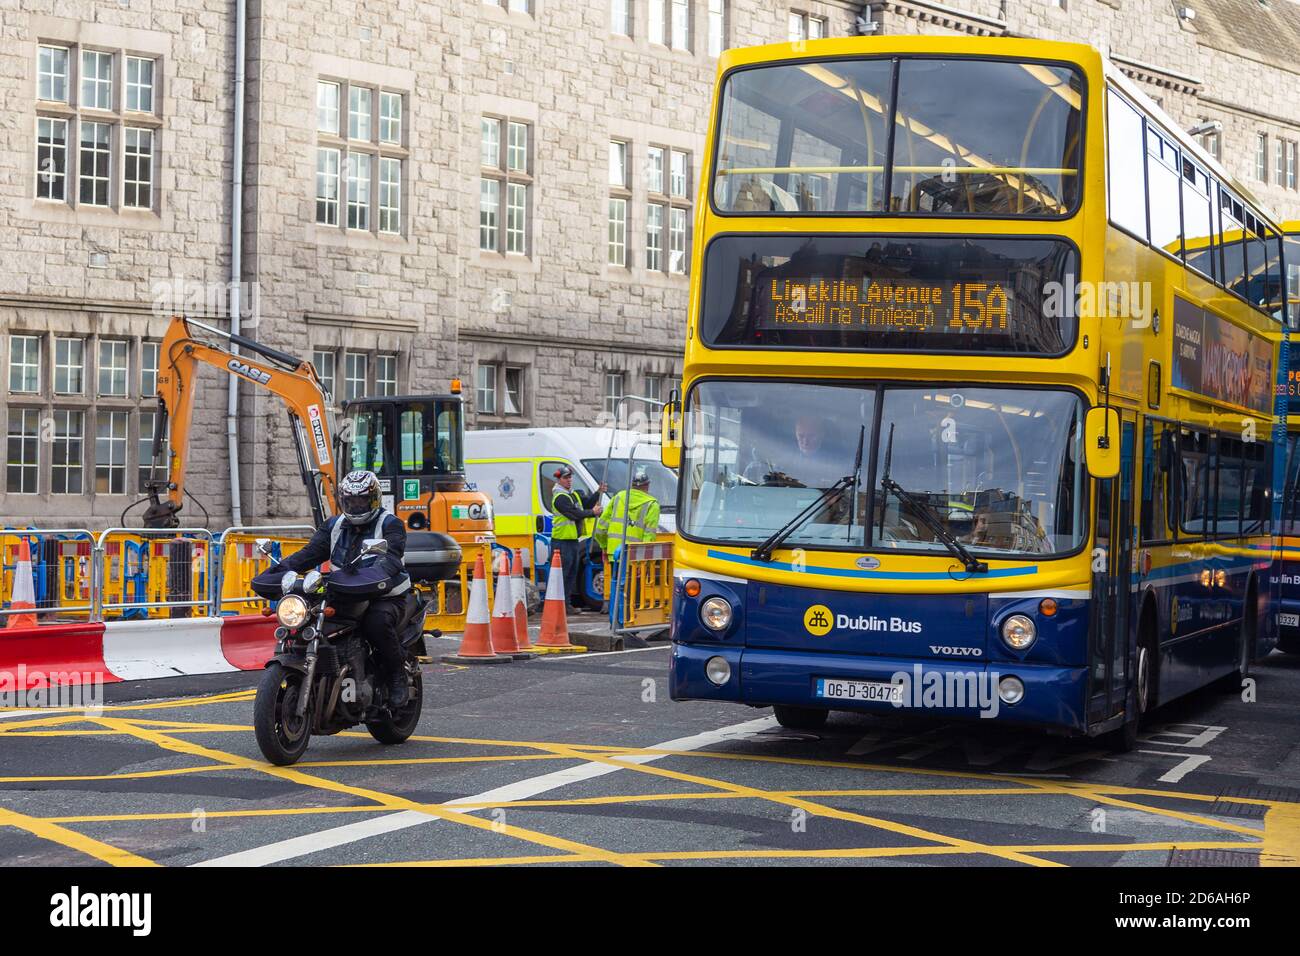 Dublin Bus Stop High Resolution Stock Photography and Images - Alamy